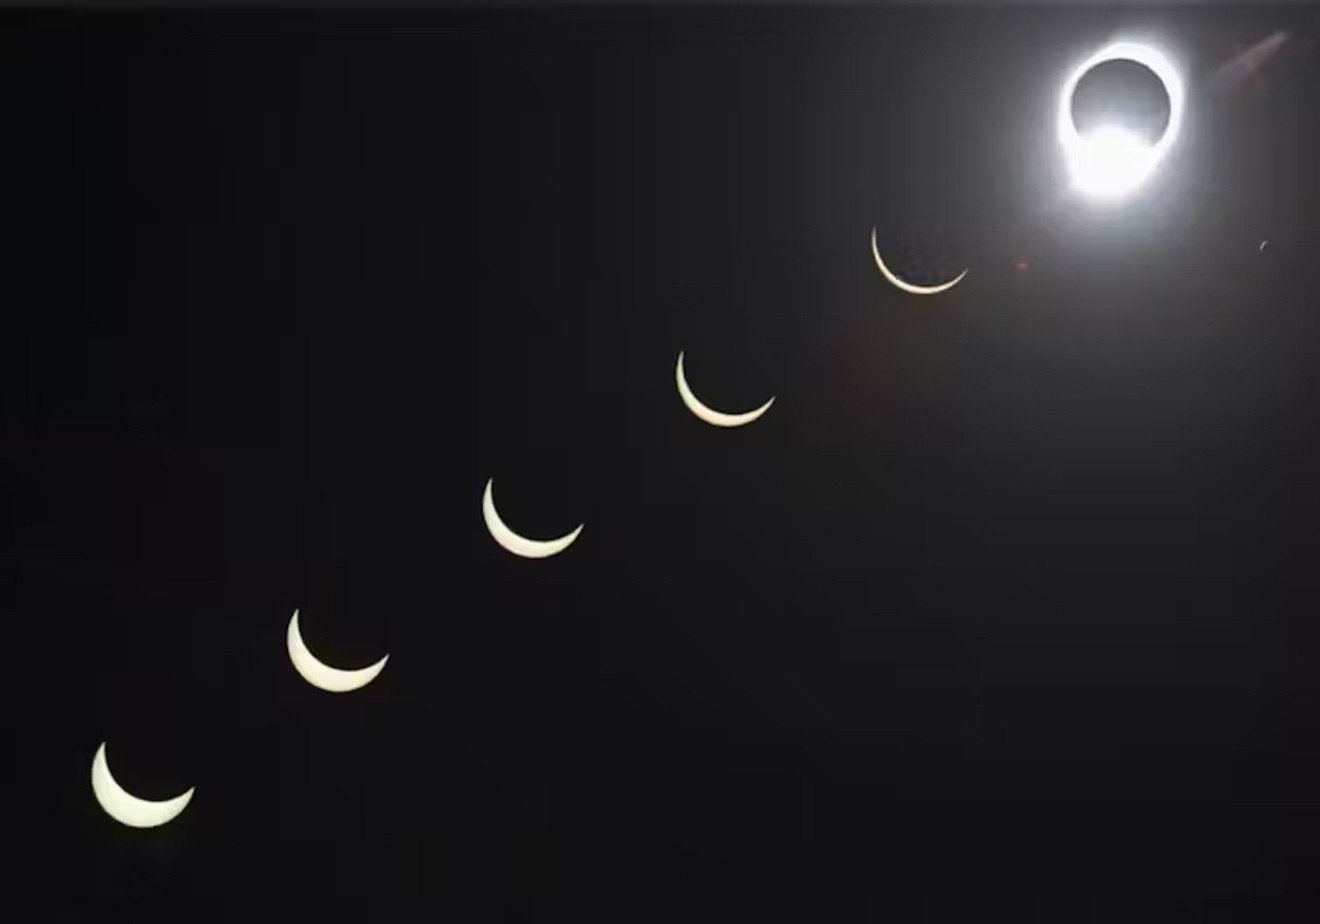 A solar eclipse approaching totality.